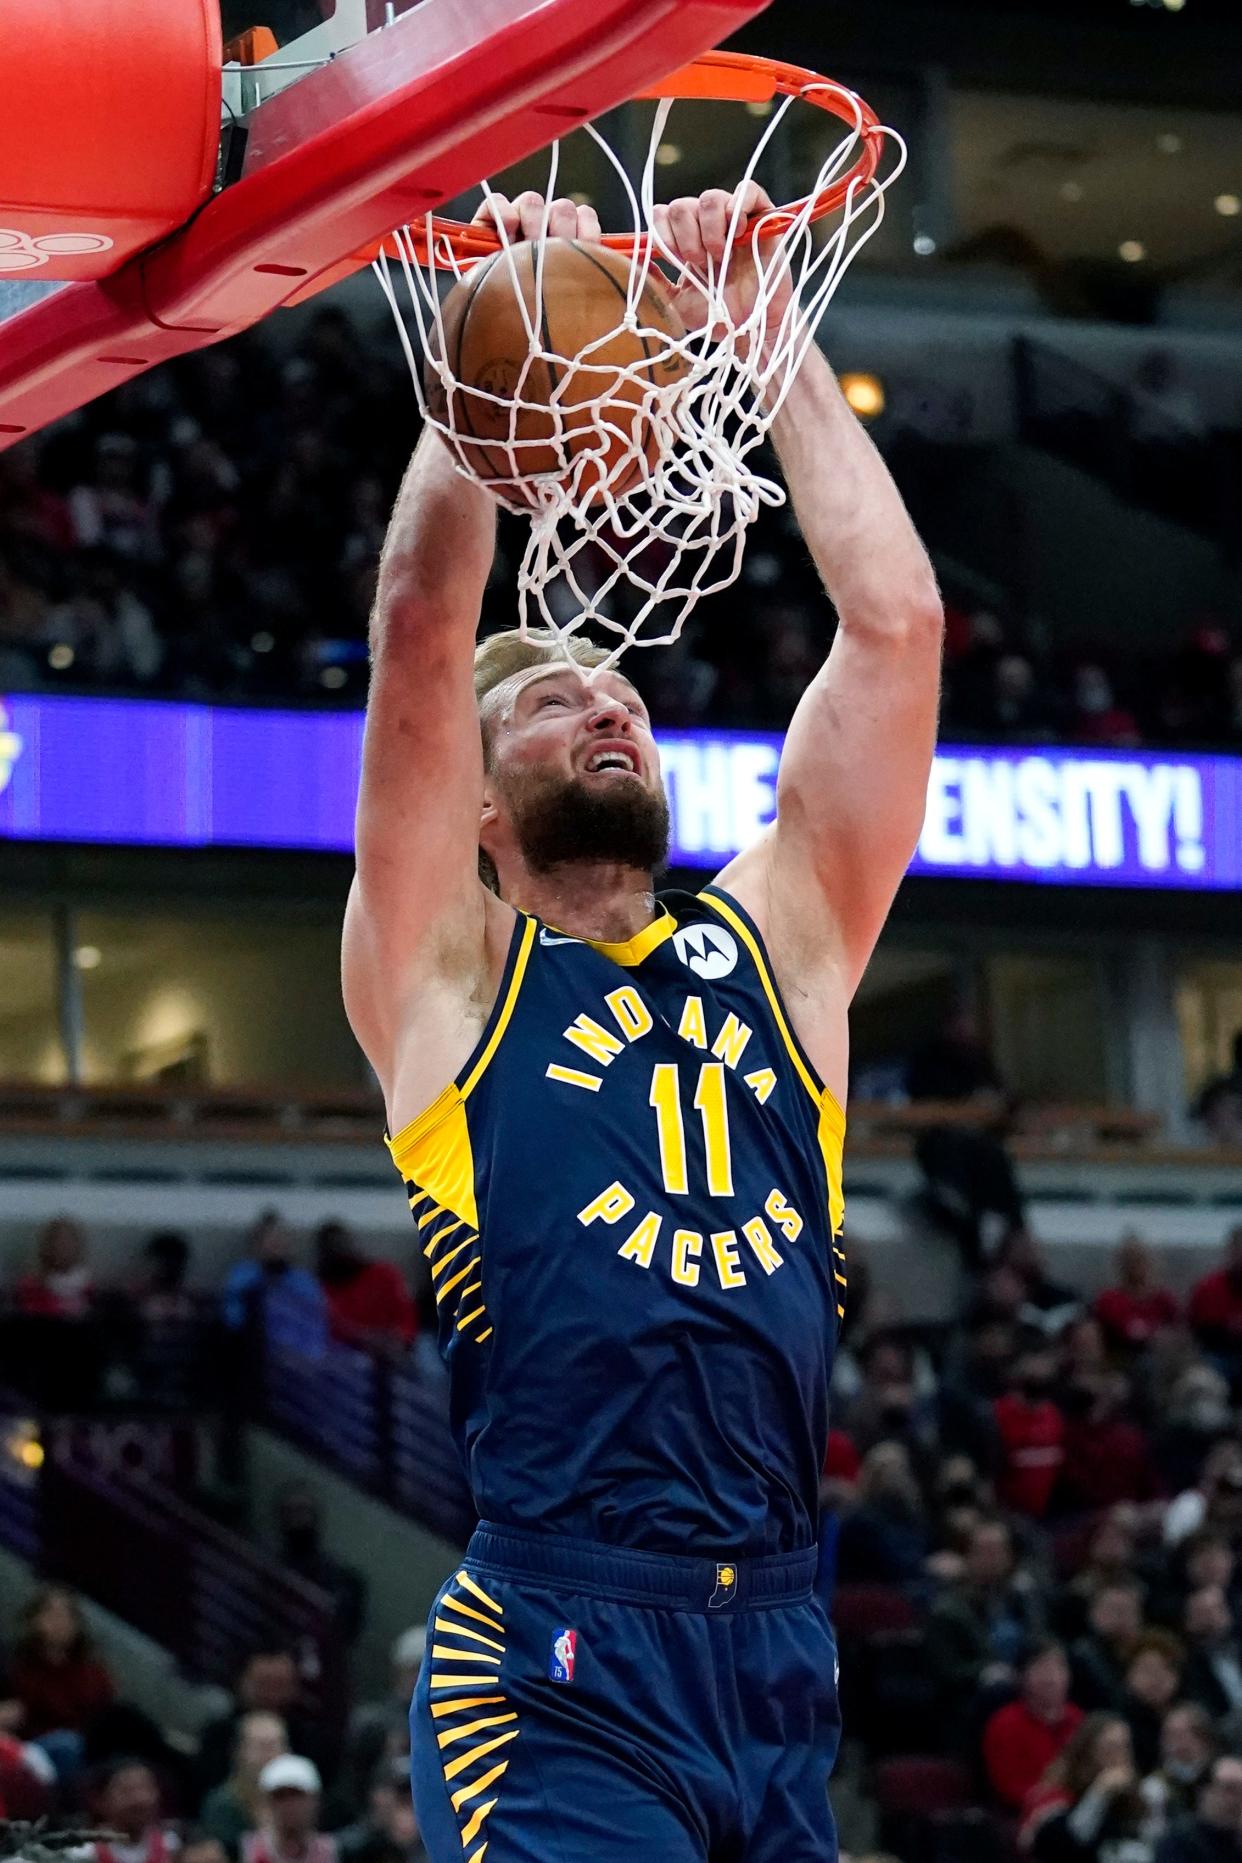 Indiana Pacers forward Domantas Sabonis dunks against the Chicago Bulls during the first half of an NBA basketball game in Chicago, Monday, Nov. 22, 2021.